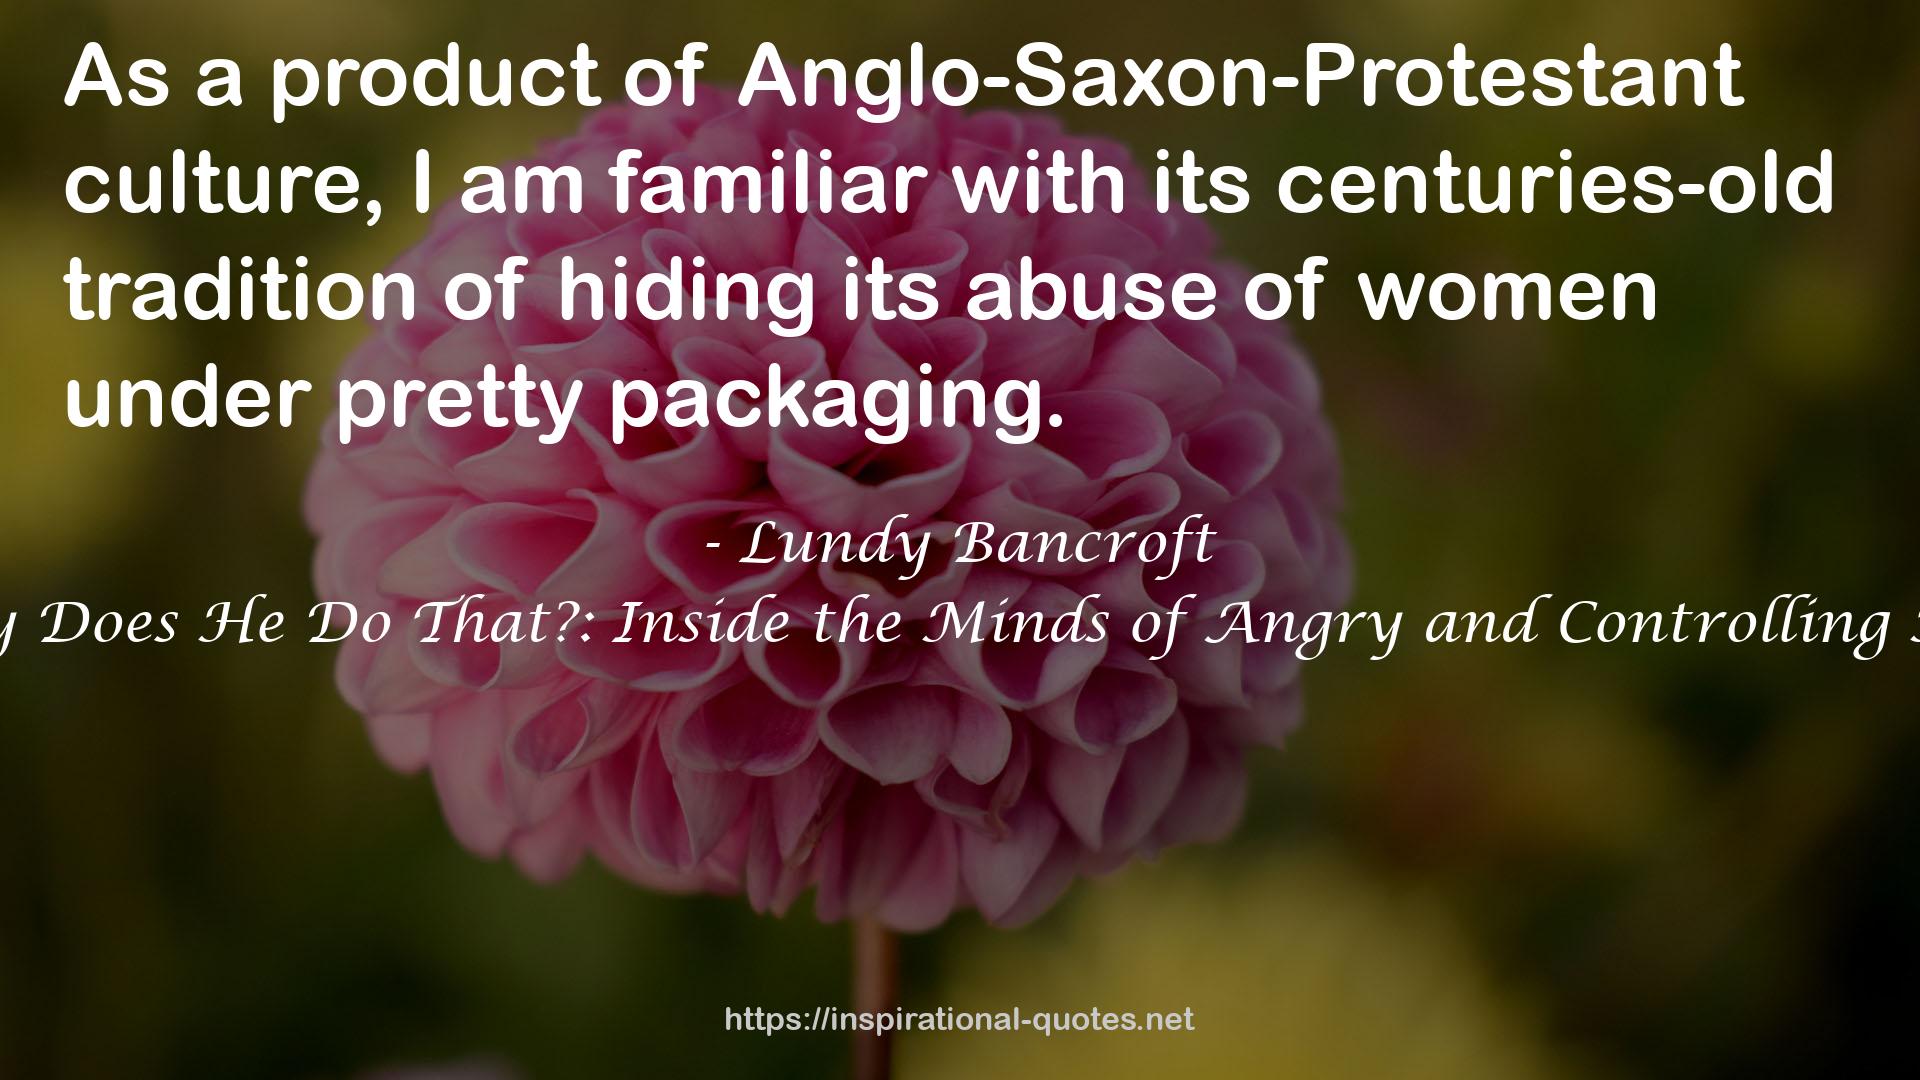 Anglo-Saxon-Protestant  QUOTES